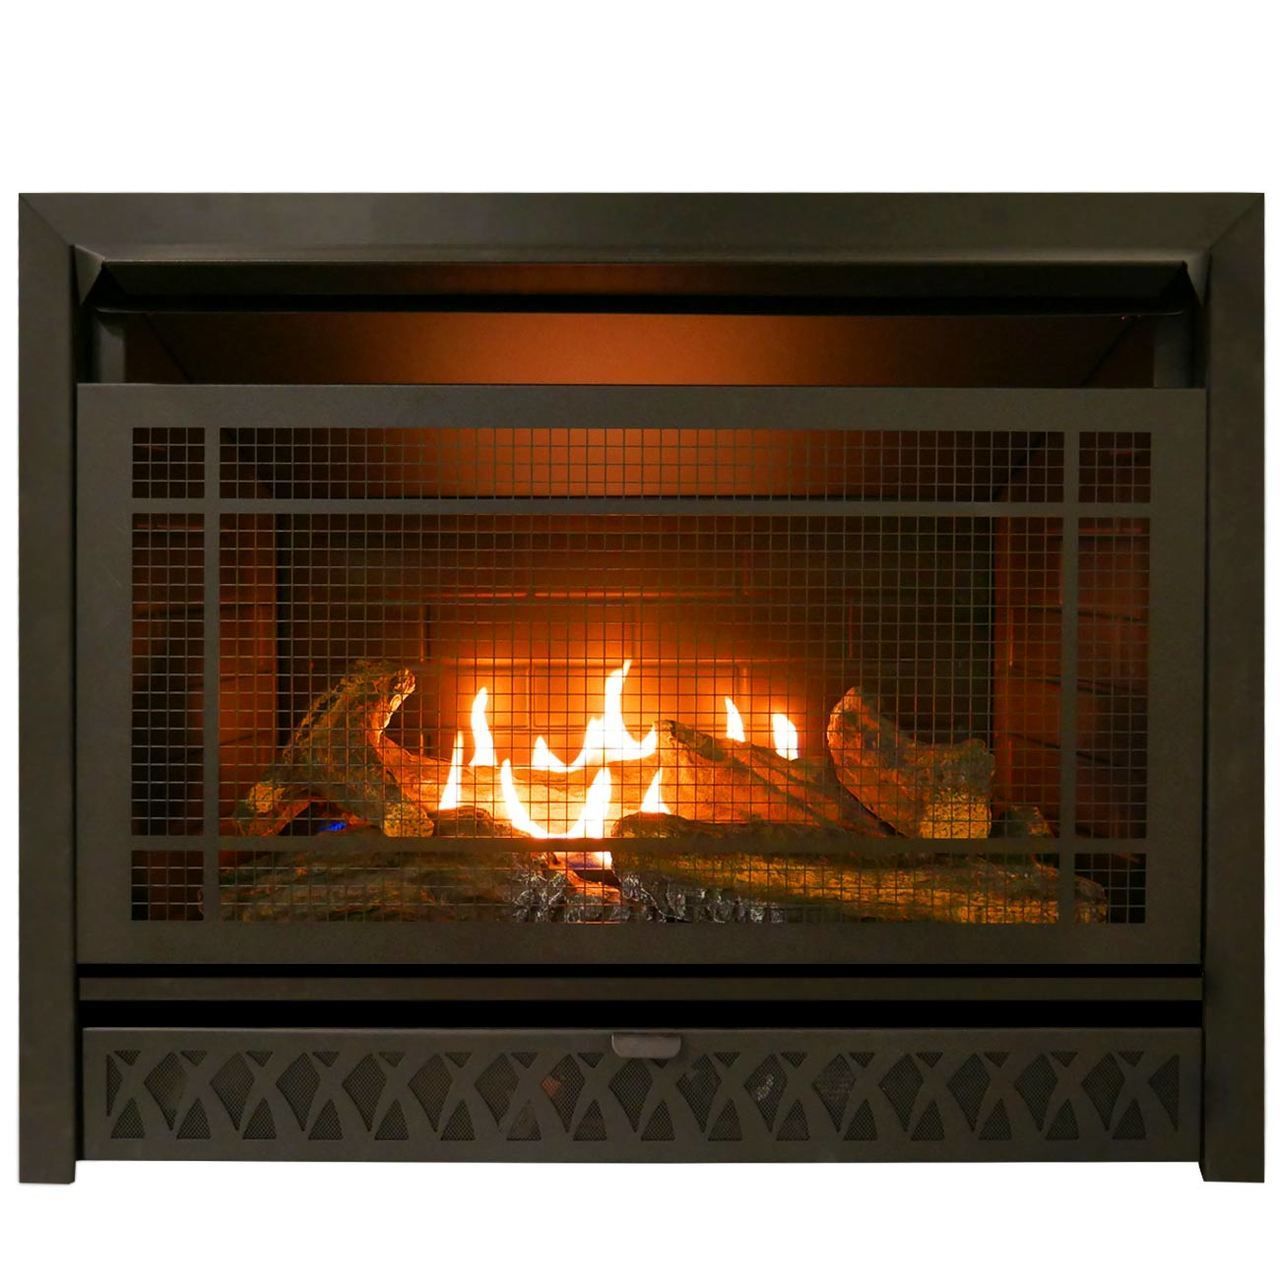 Duluth Fireplace Beautiful Pro Fireplaces 29 In Ventless Dual Fuel Firebox Insert